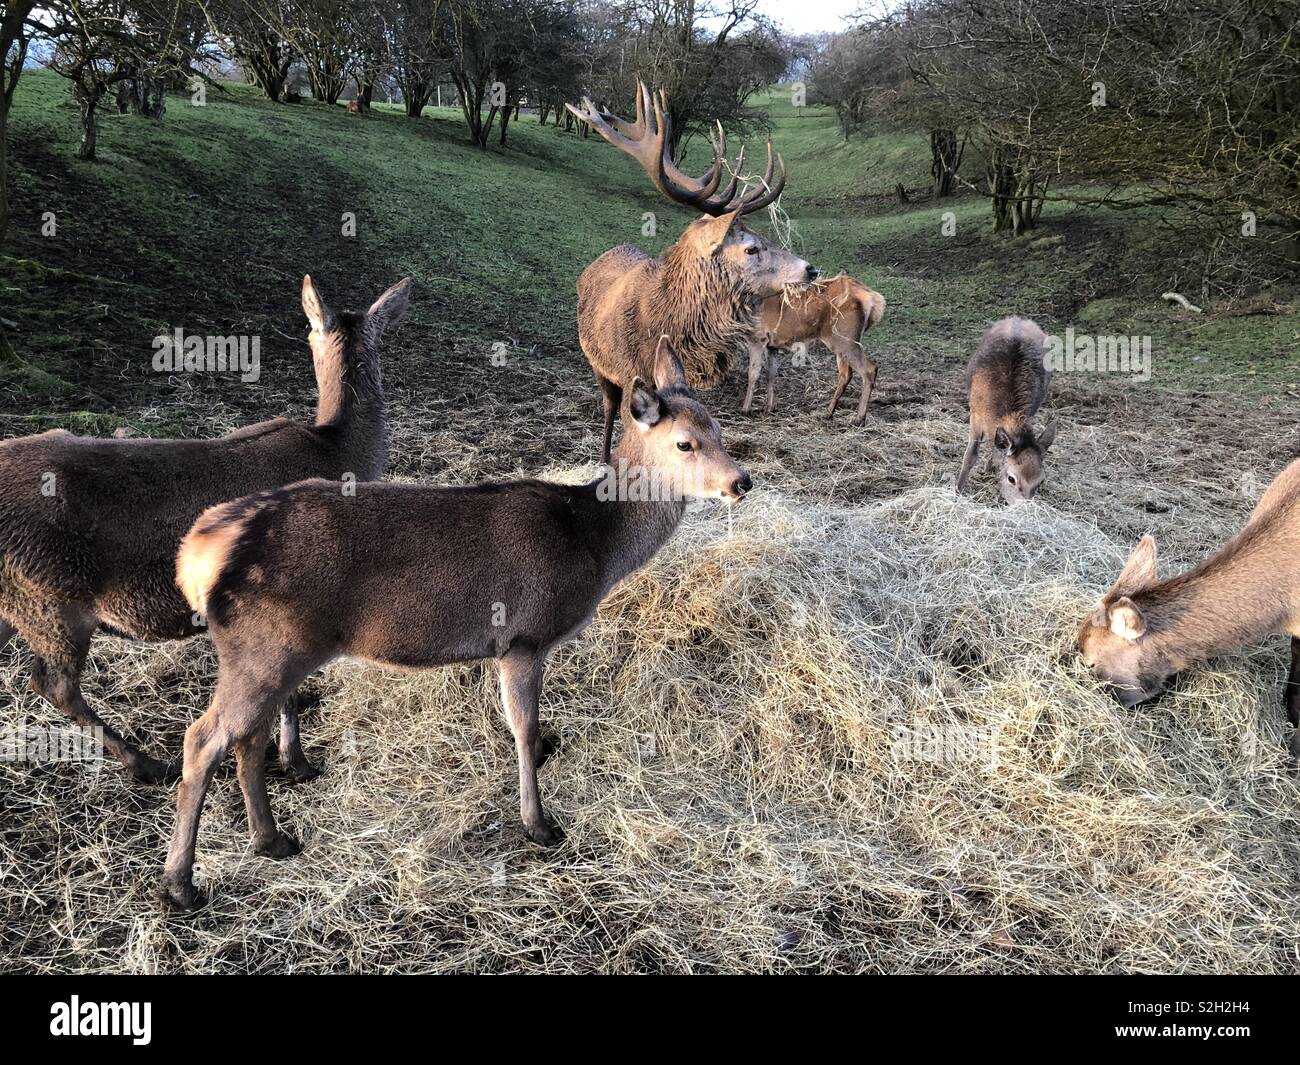 A majestic stag surrounded by his harem of hinds imperiously grazes on straw on a remote Cotswold ridge at Christmas. Stock Photo